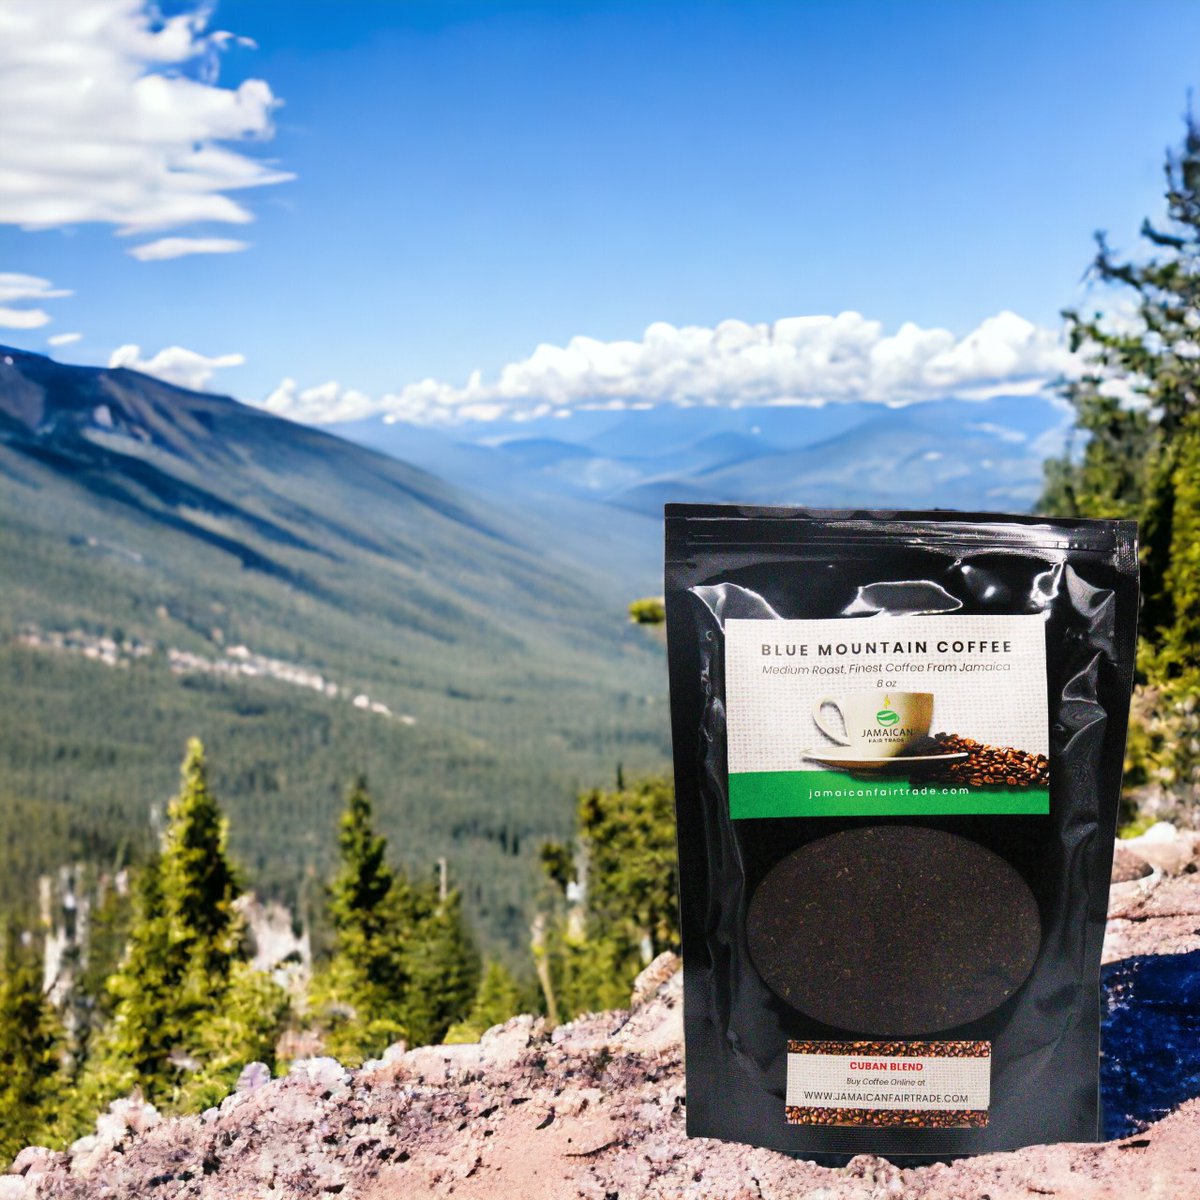 Sipping on the essence of paradise with every cup of Blue Mountain Coffee – where elevation meets perfection. ☕🏞️ 

#BlueMountainCoffee #CoffeeHeaven #ElevatedBrew #BeanEuphoria #SipOfParadise #CoffeeAdventures #MountainHarmony #BrewWithAView